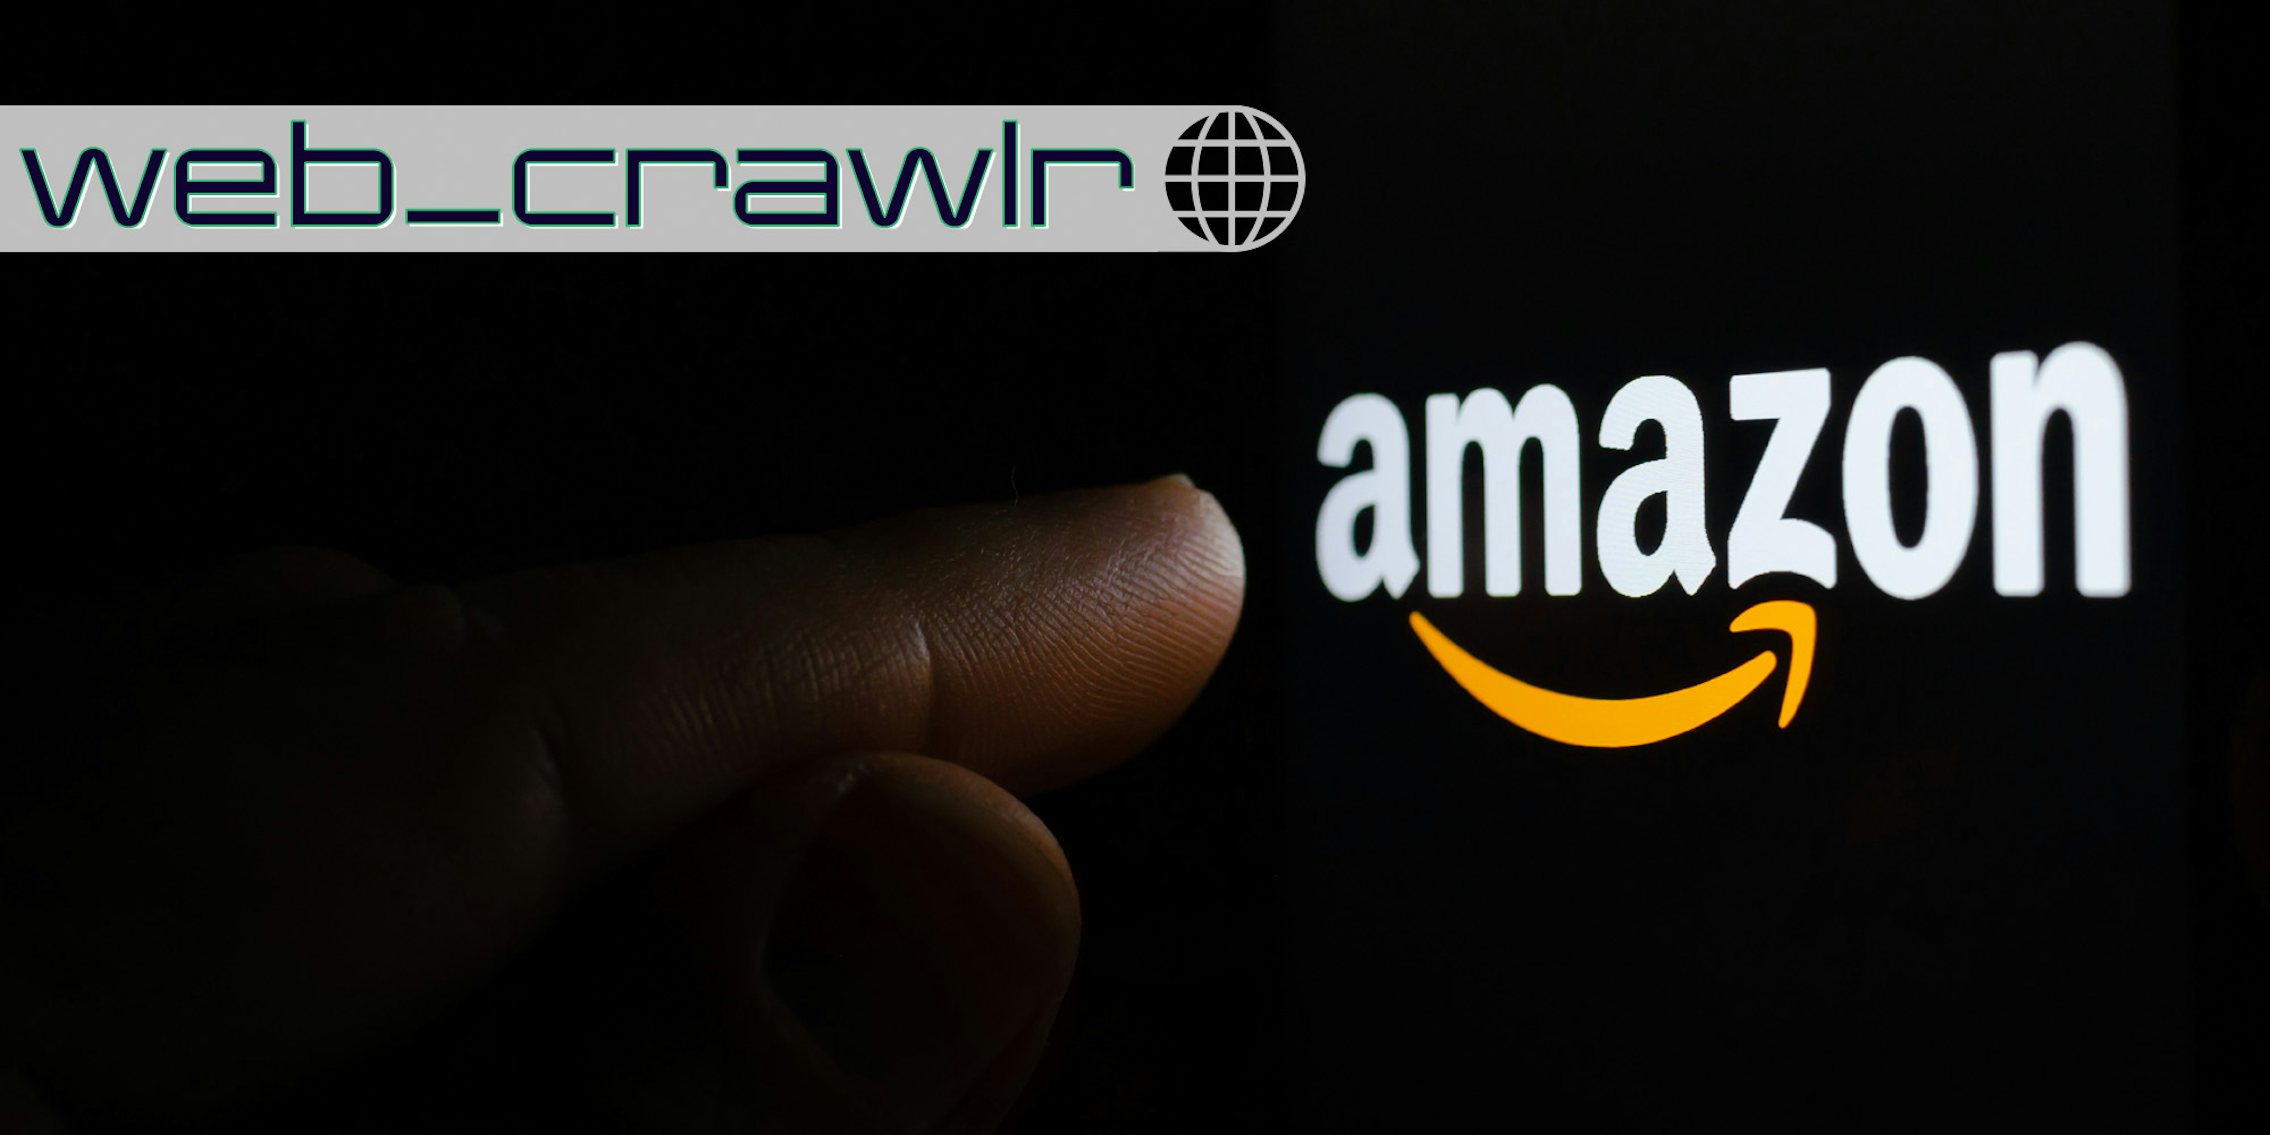 Amazon logo on a screen in a dark and finger pointing at it. The Daily Dot newsletter web_crawlr logo is in the top left corner.